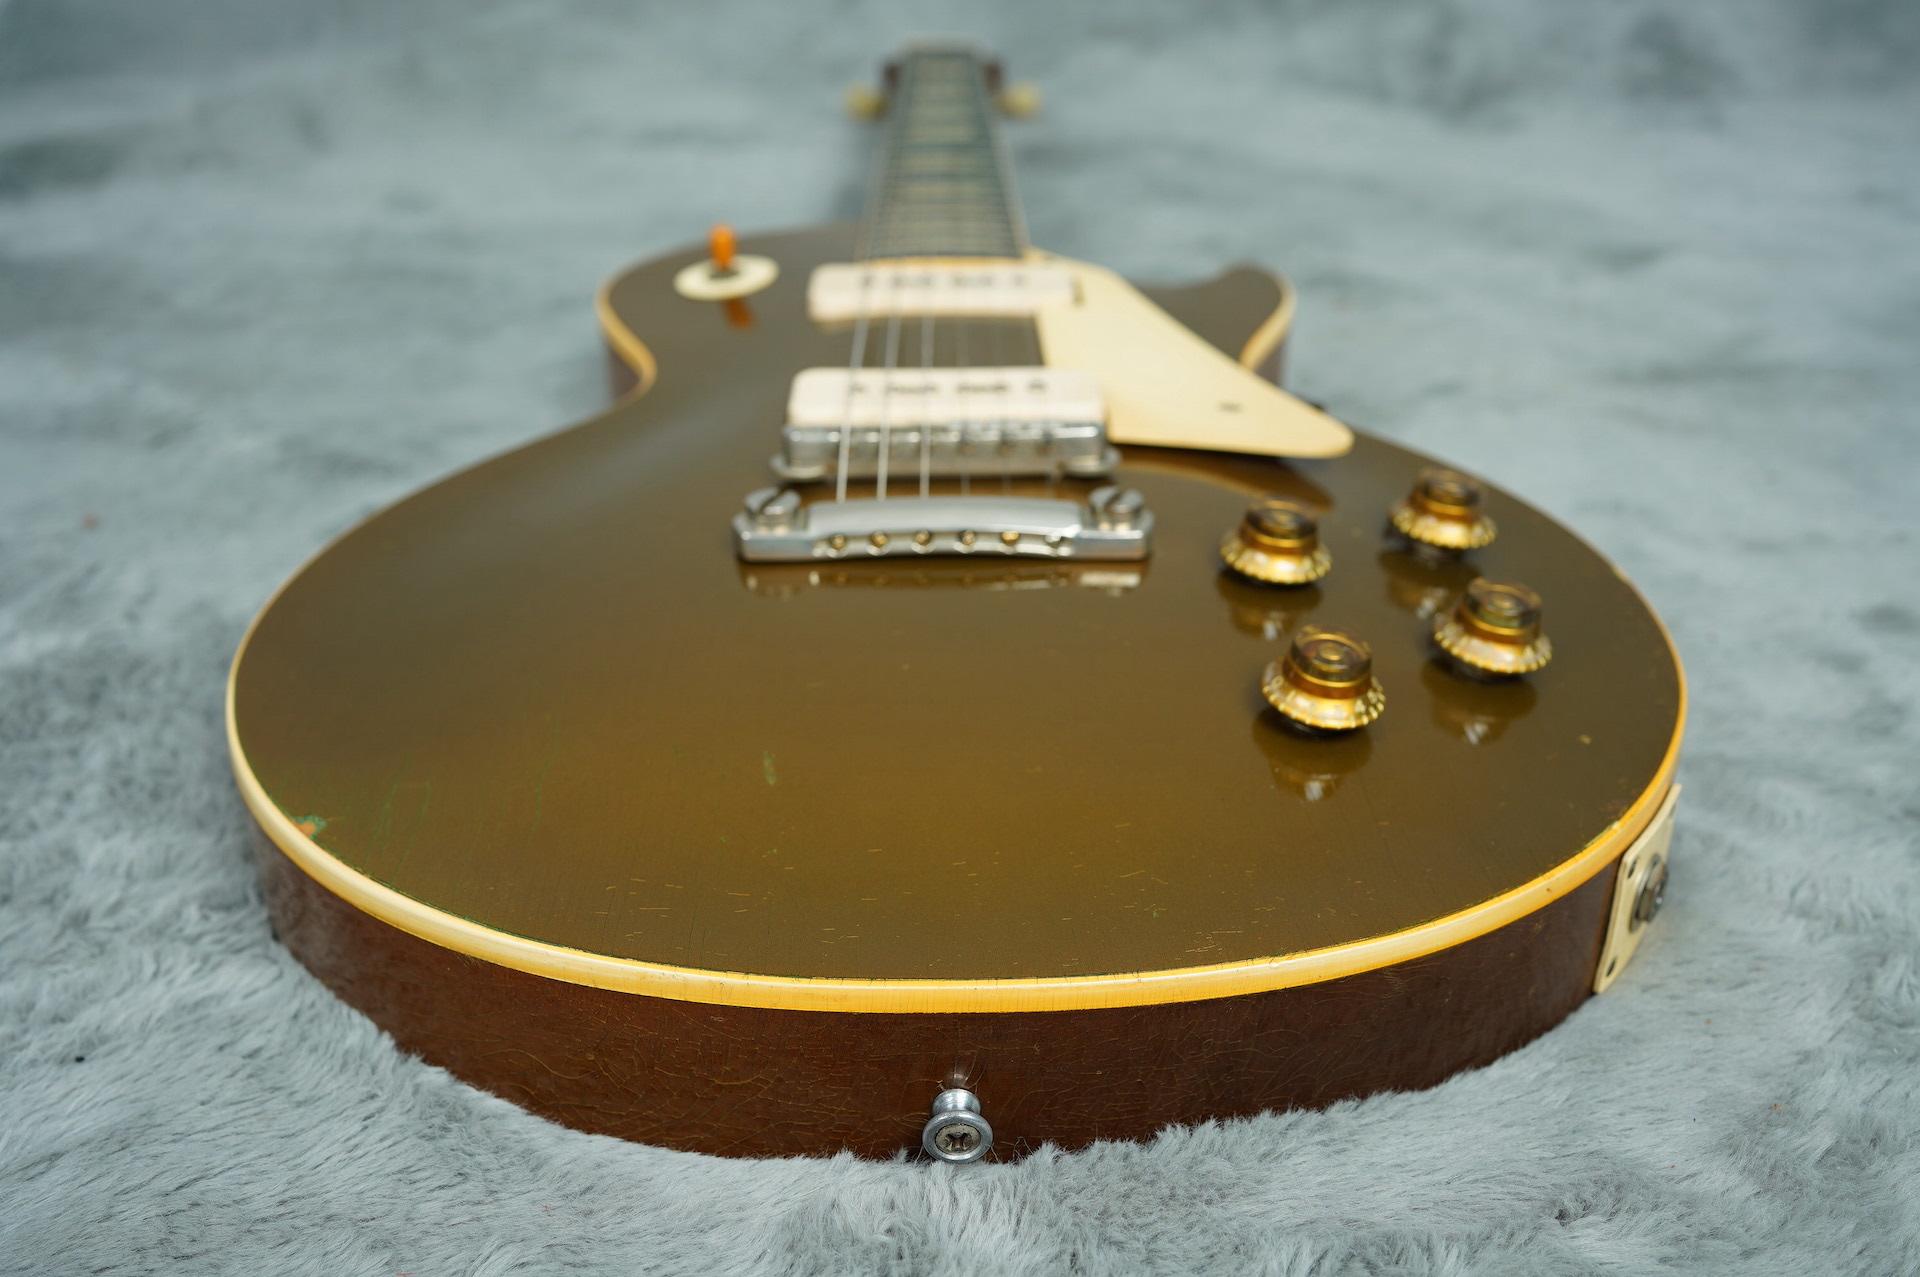 1956 Gibson Les Paul Standard Goldtop + OHSC + Candy